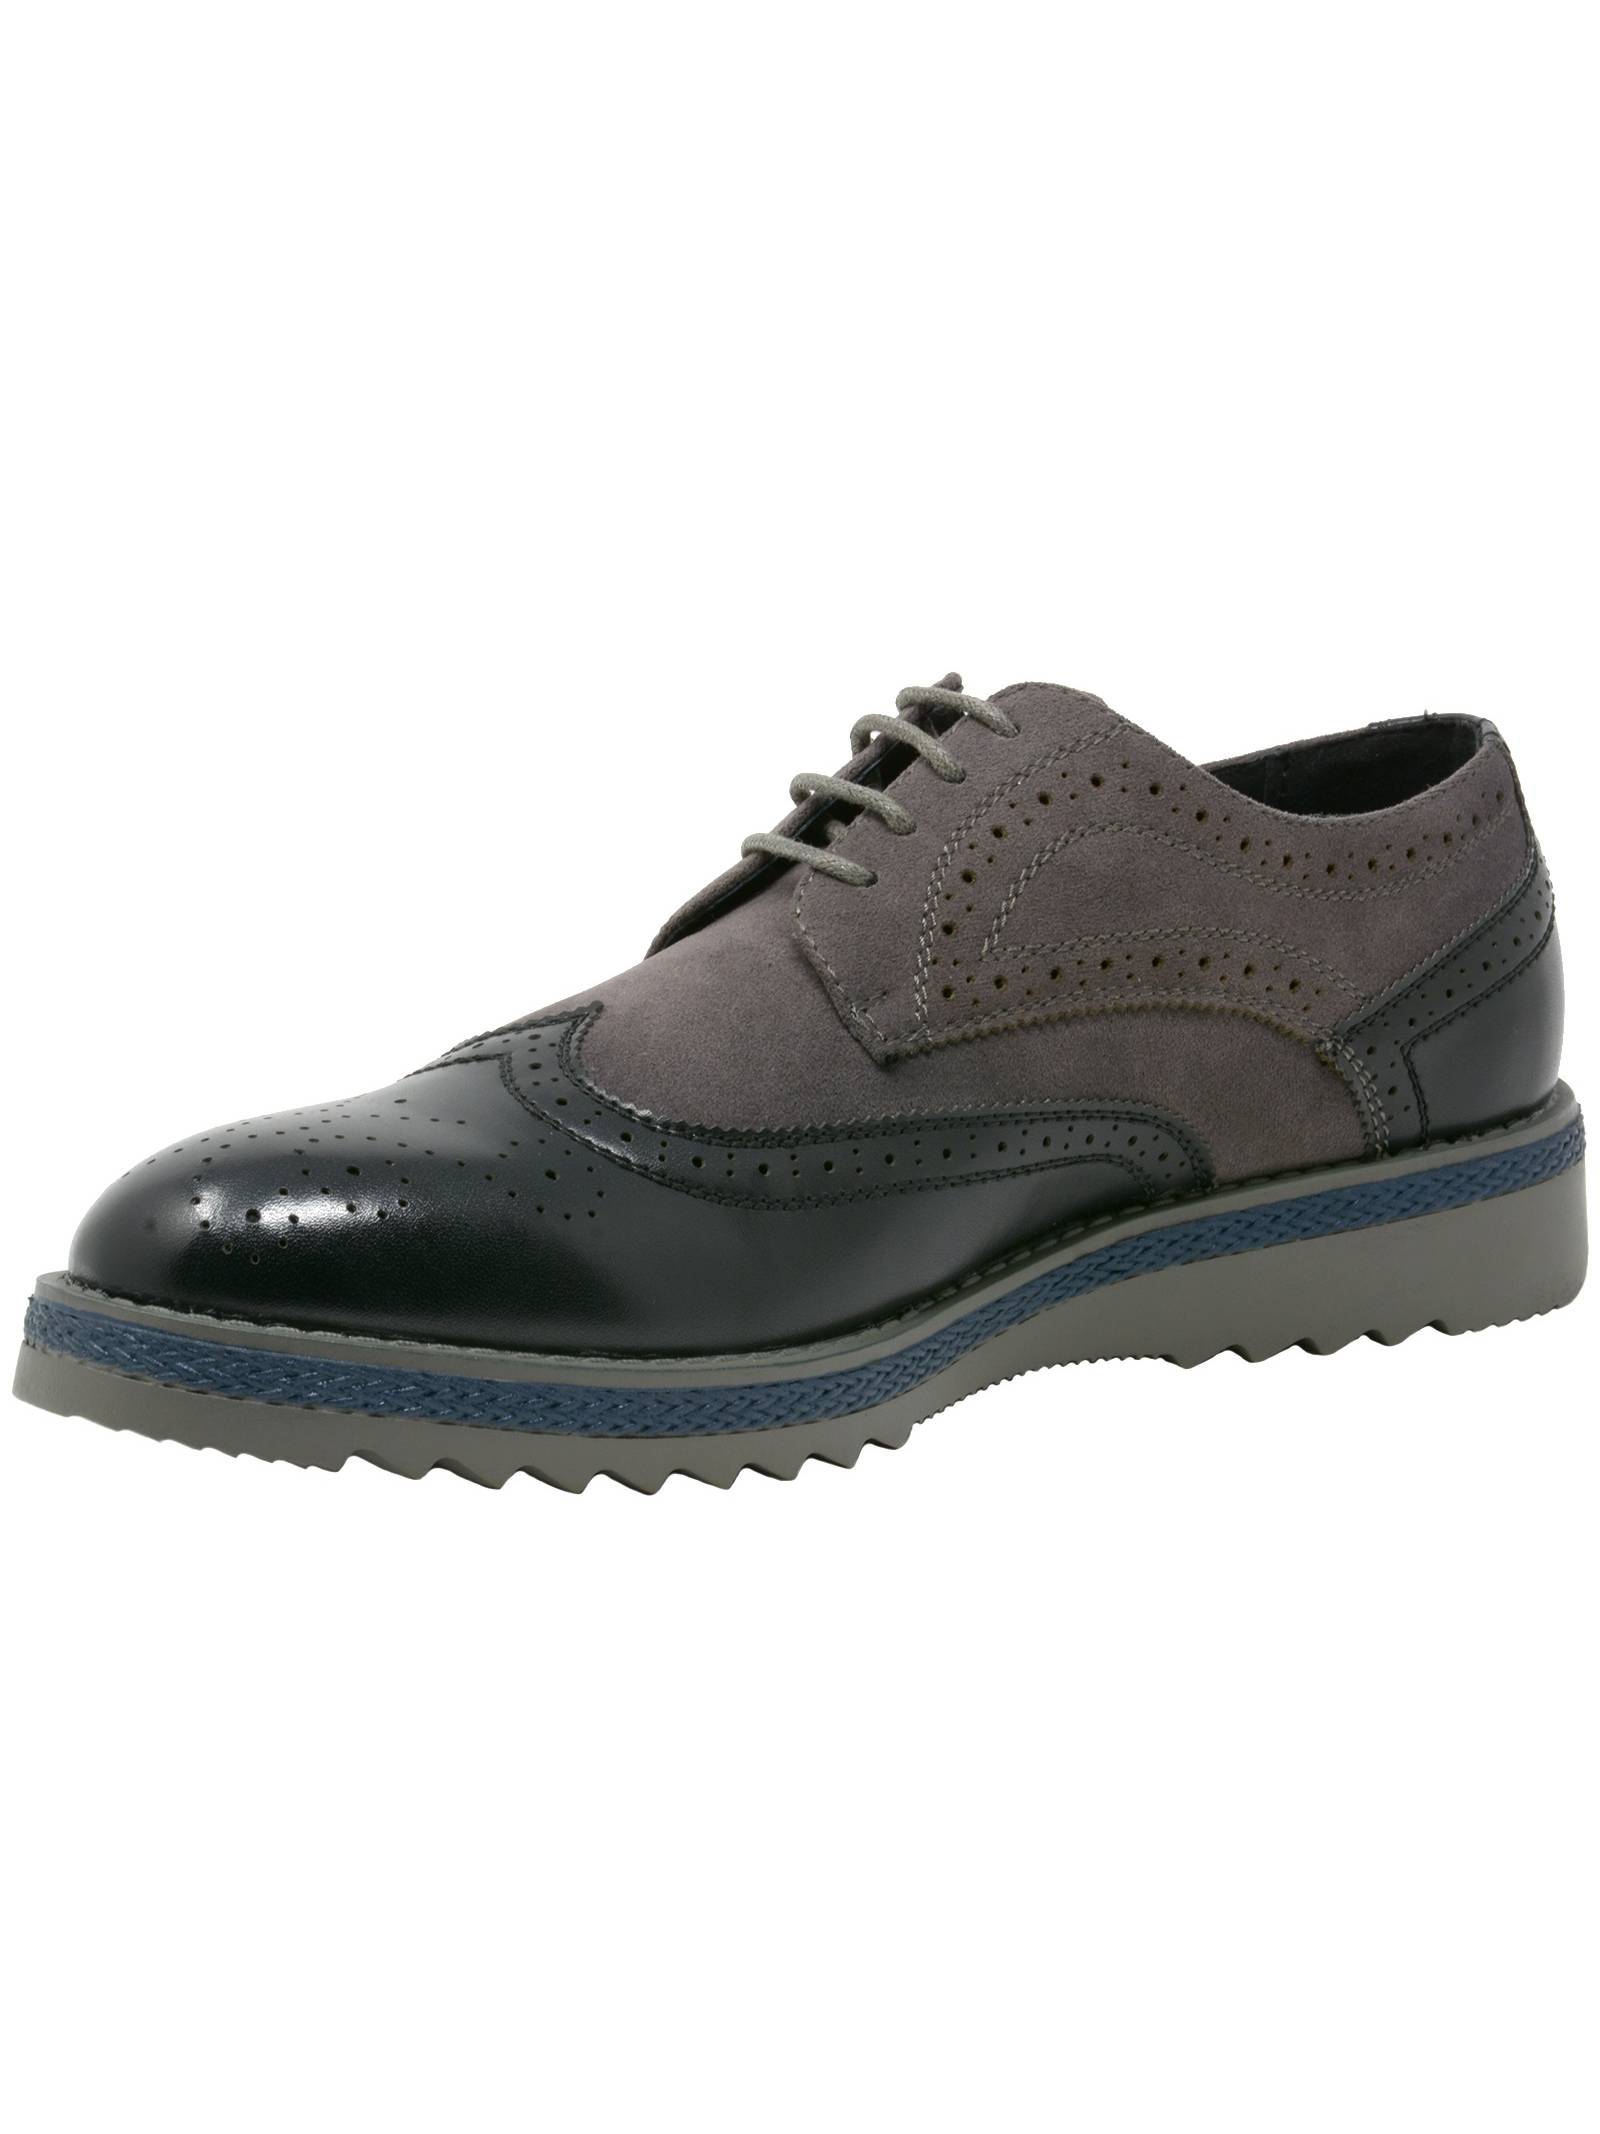 Alpine Swiss Alec Mens Wingtip Shoes 1.5” Ripple Sole Leather Insole & Lining - image 4 of 7